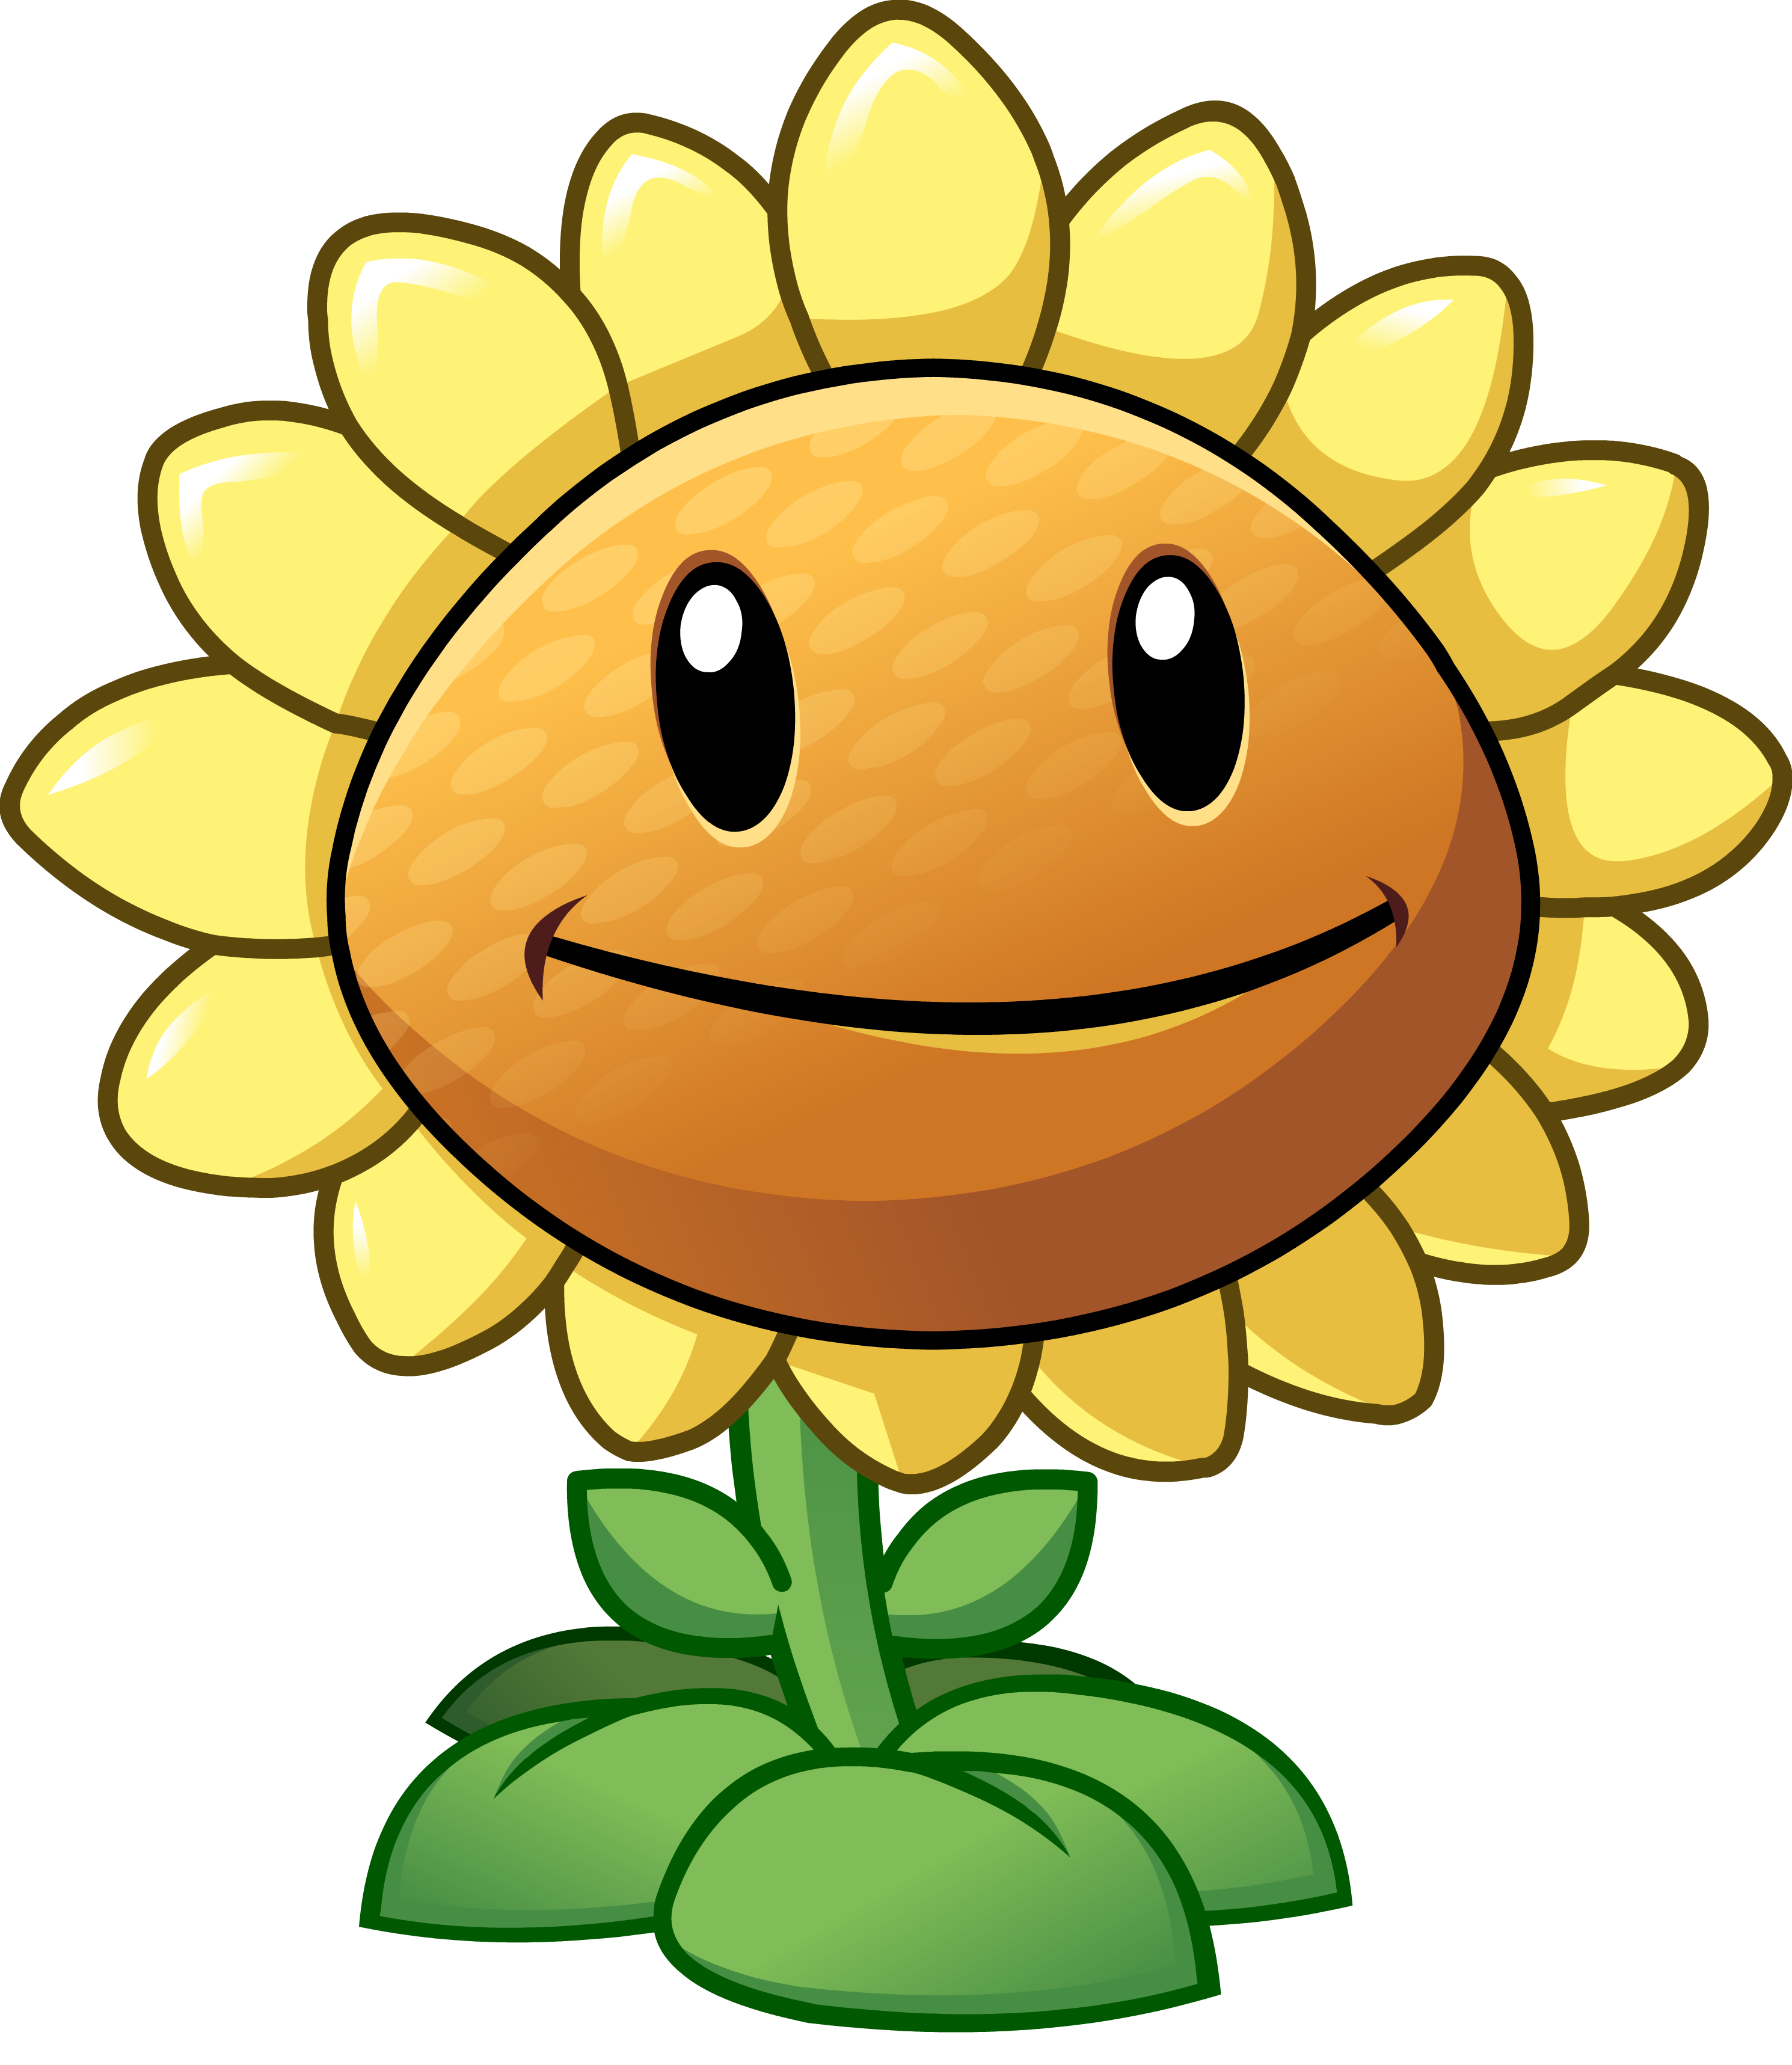 sims 3 plants vs. zombies sunflower free download